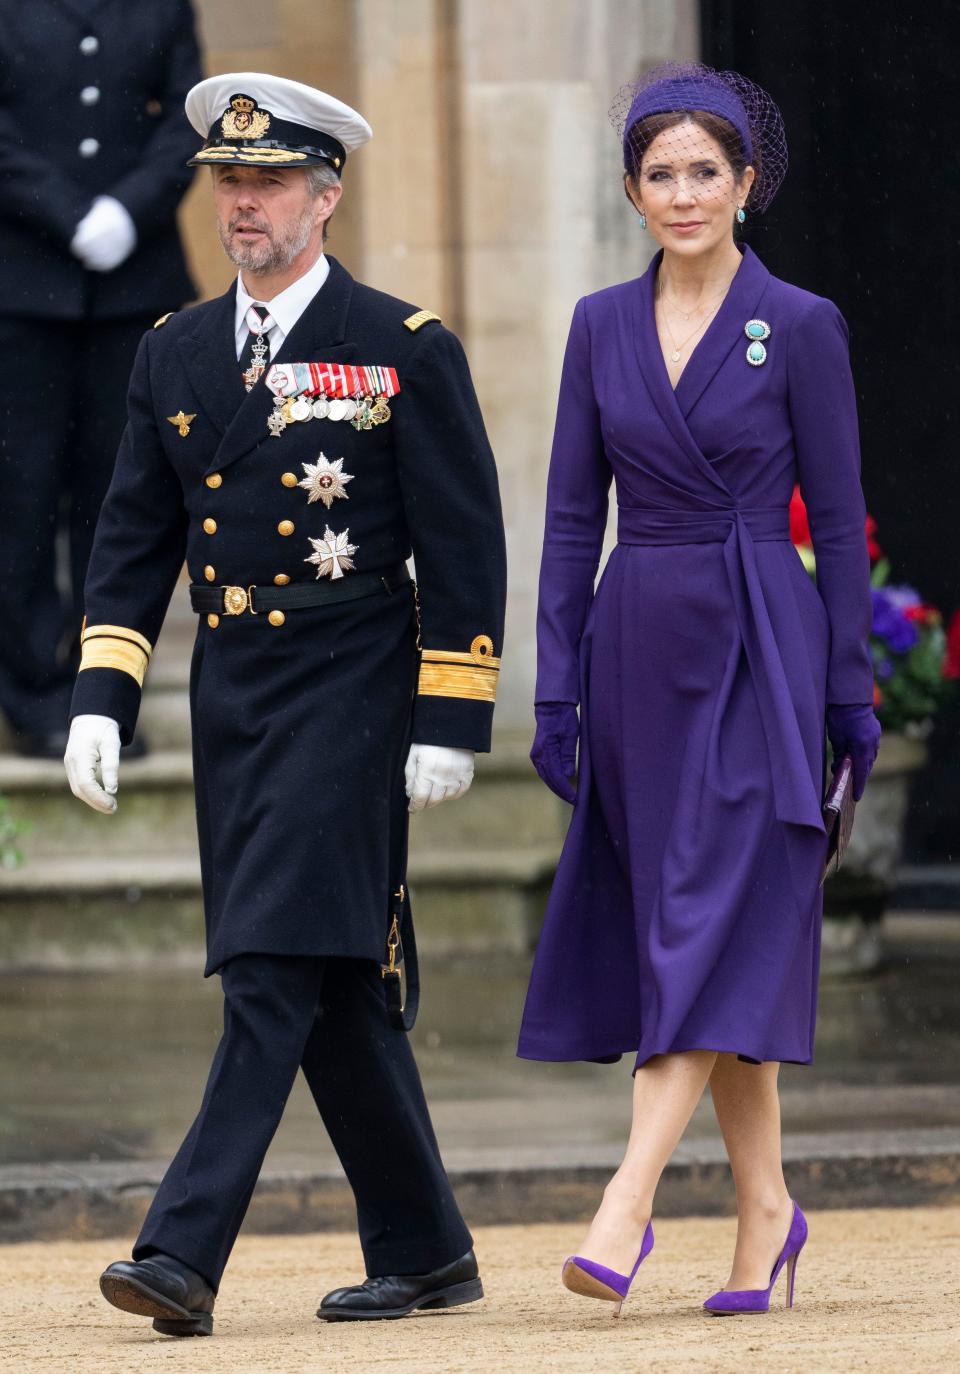 Crown Princess Mary of Denmark and Crown Prince Frederik of Denmark at Westminster Abbey during the coronation of King Charles